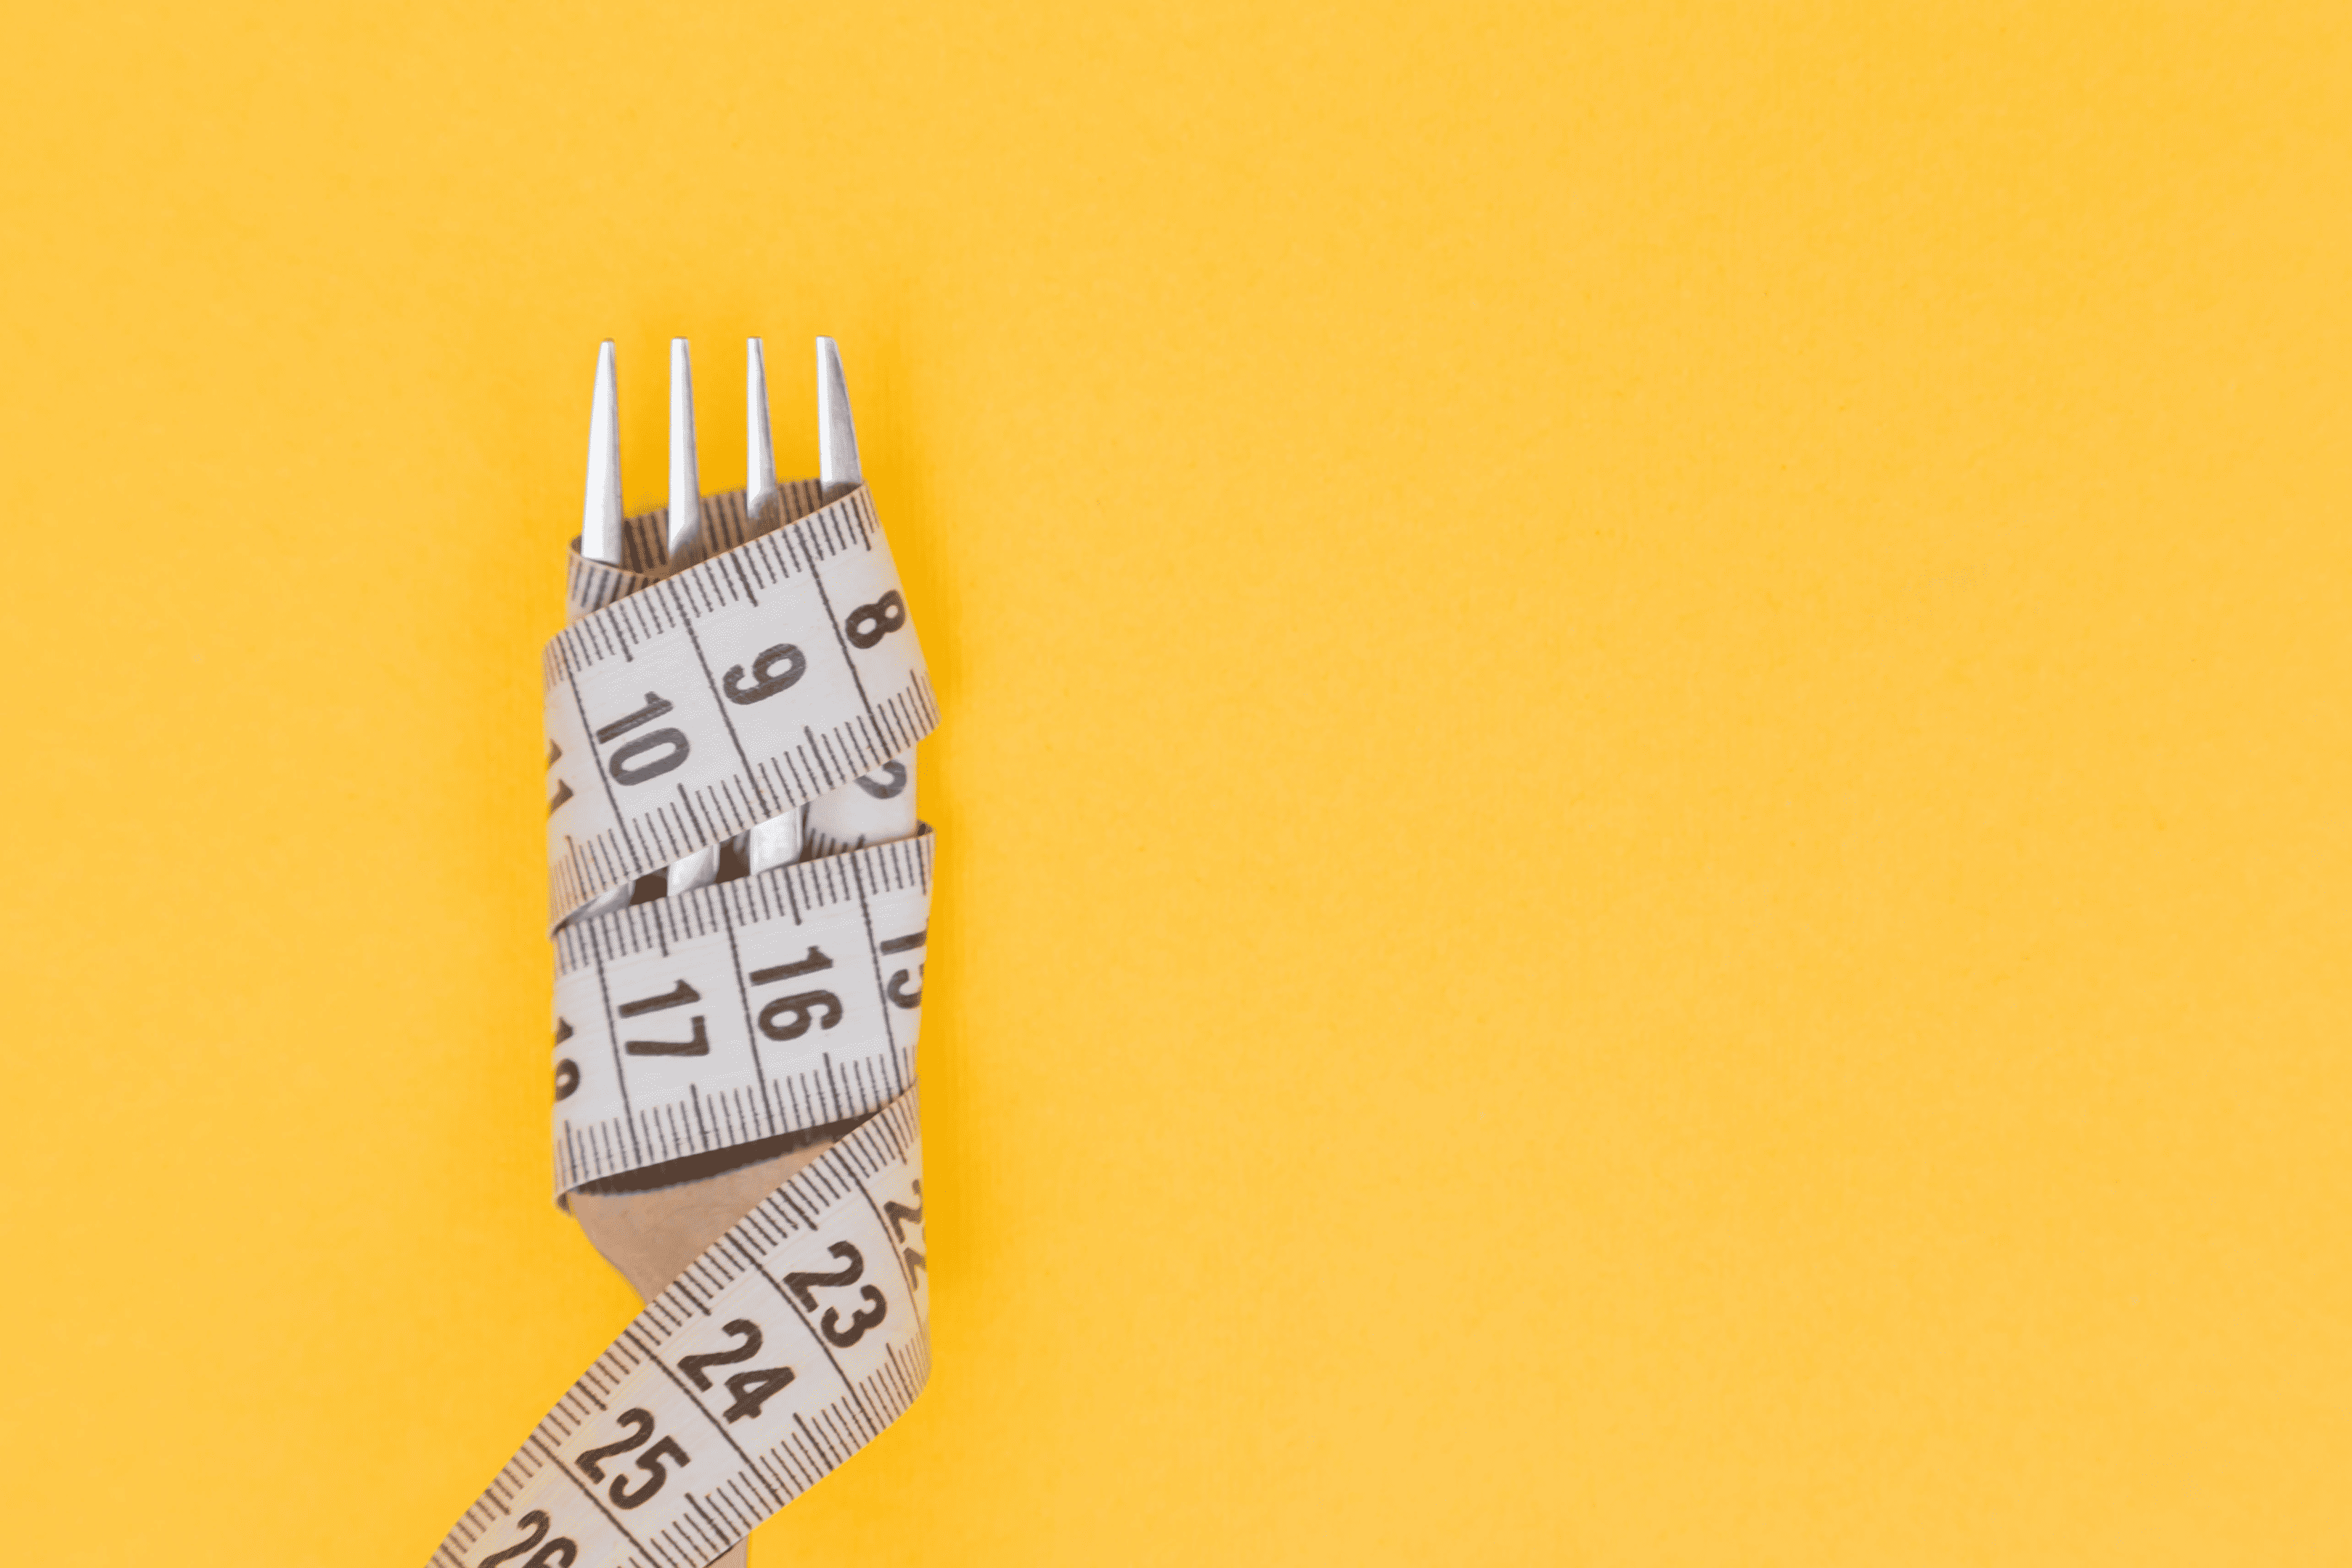 Measuring tape wrapped on a fork